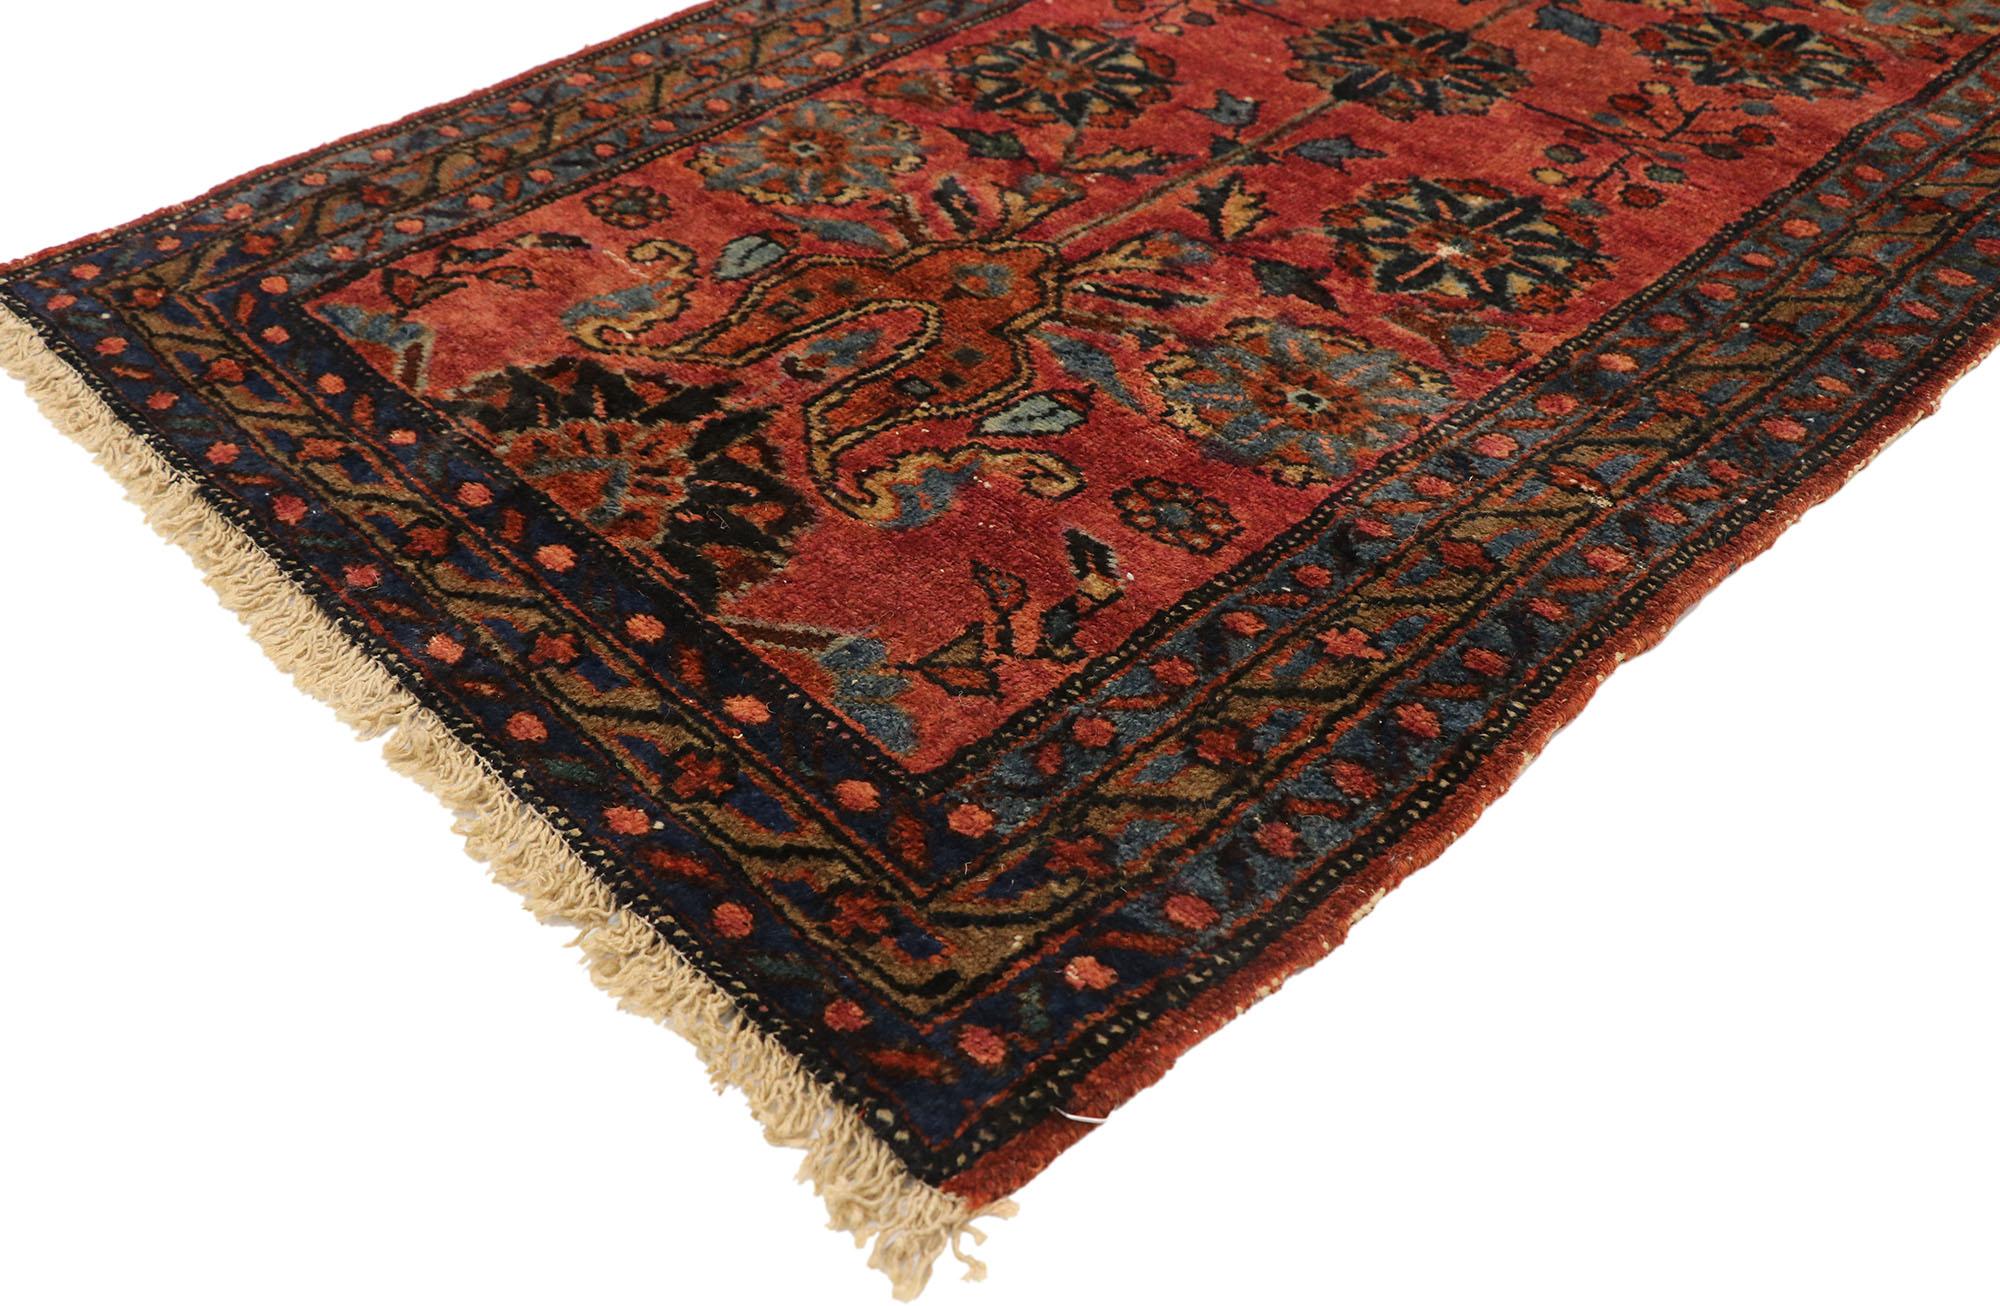 77411 vintage Persian Hamadan rug with English Tudor Manor House style, Small Persian Accent rug. With its warm, rich colors and ornate detailing, this hand knotted wool vintage Persian Hamadan accent rug is poised to impress. It features a